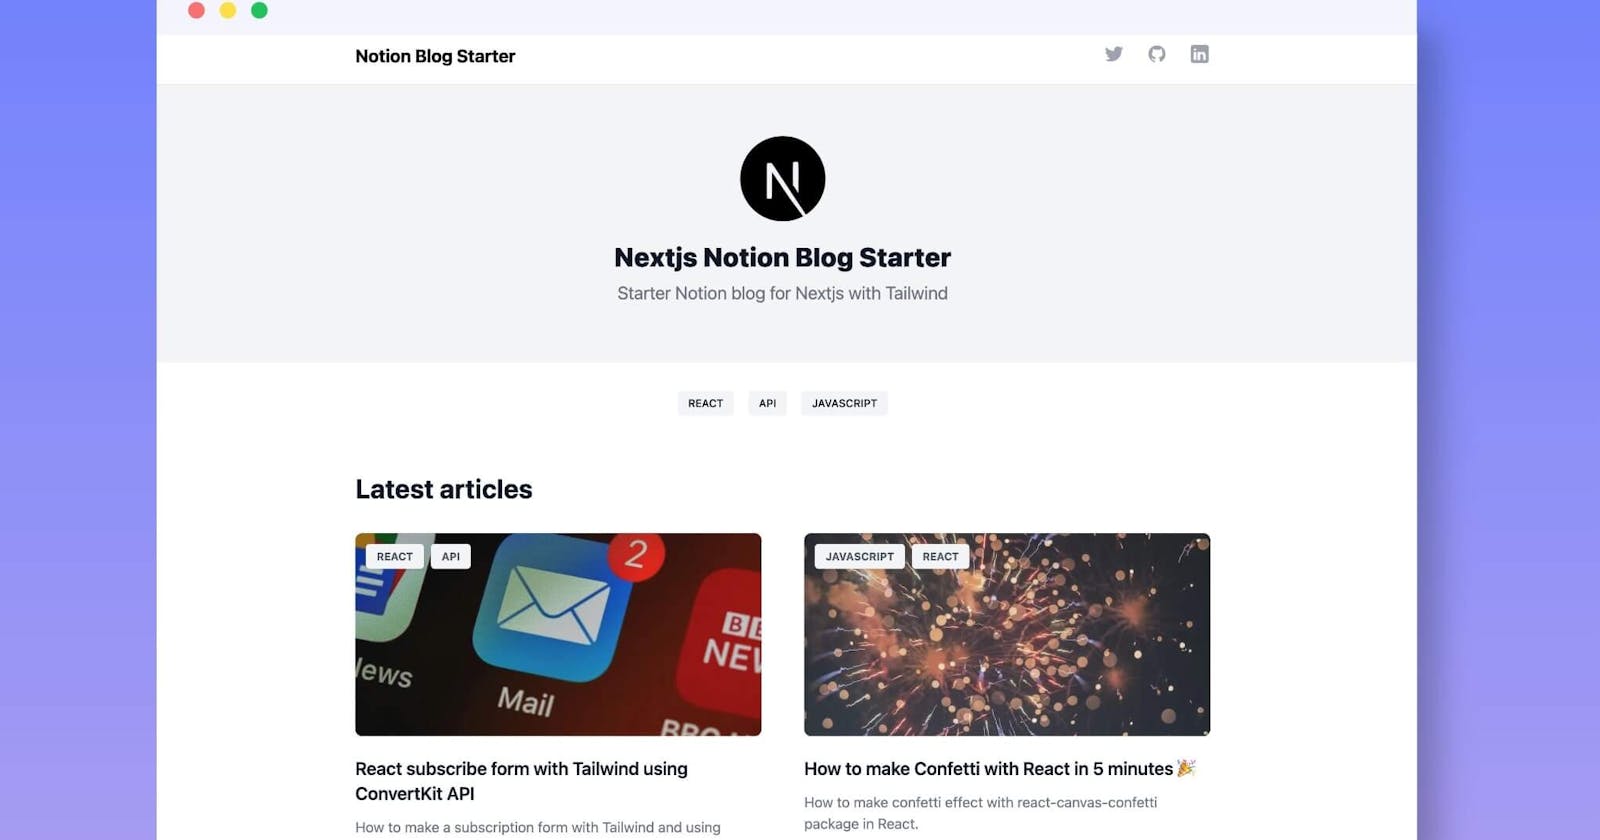 Set up a Notion Nextjs blog with Tailwind in 10 min